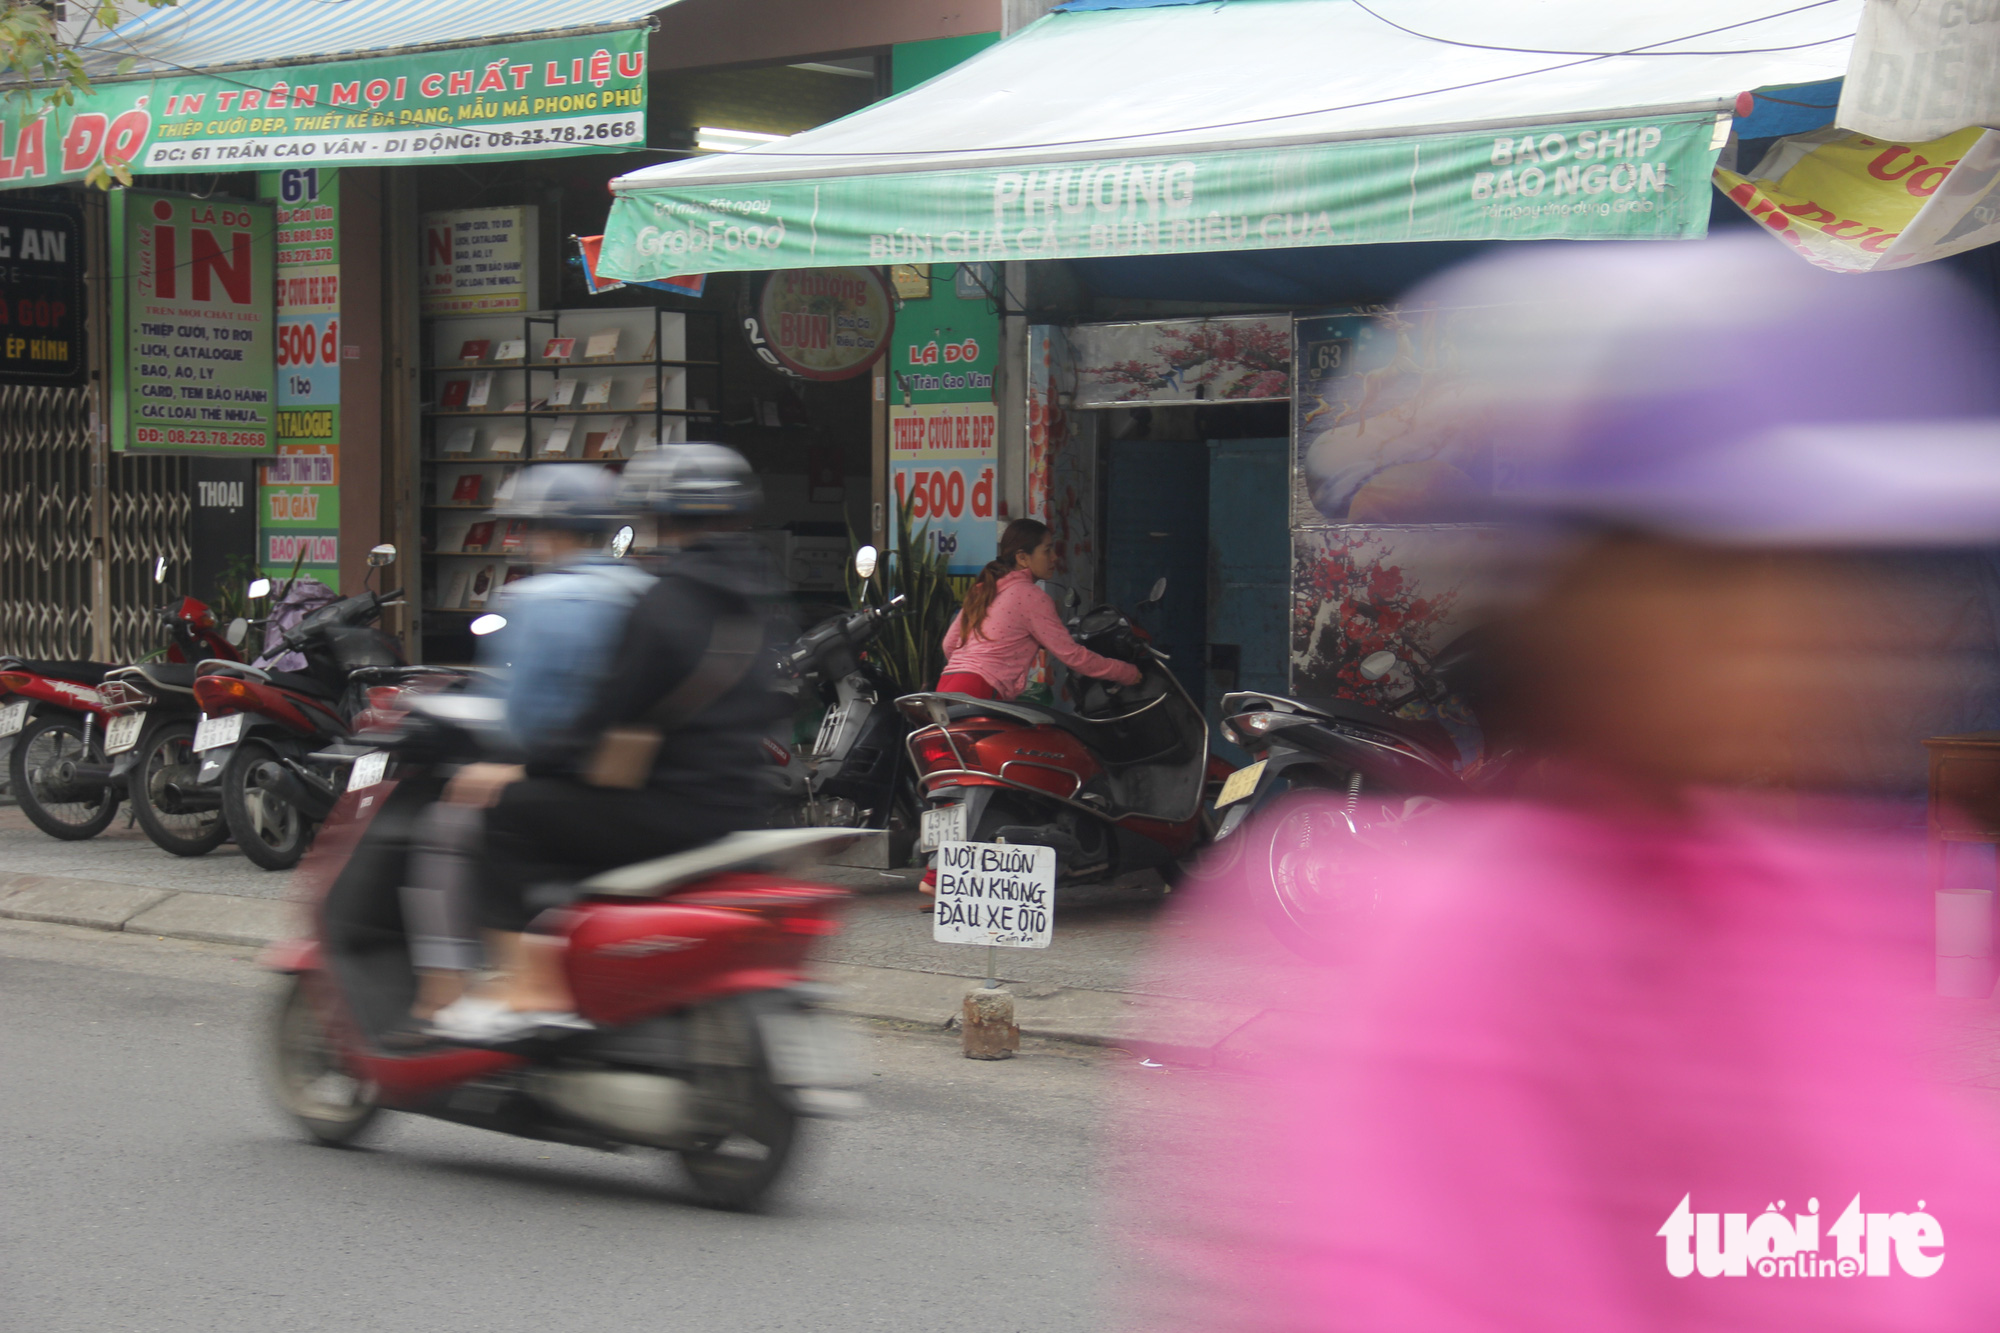 A ‘no parking’ sign is placed on the roadway of Tran Cao Van Street in Thanh Khe District, Da Nang City to prevent drivers from parking cars. Photo: Truong Trung / Tuoi Tre